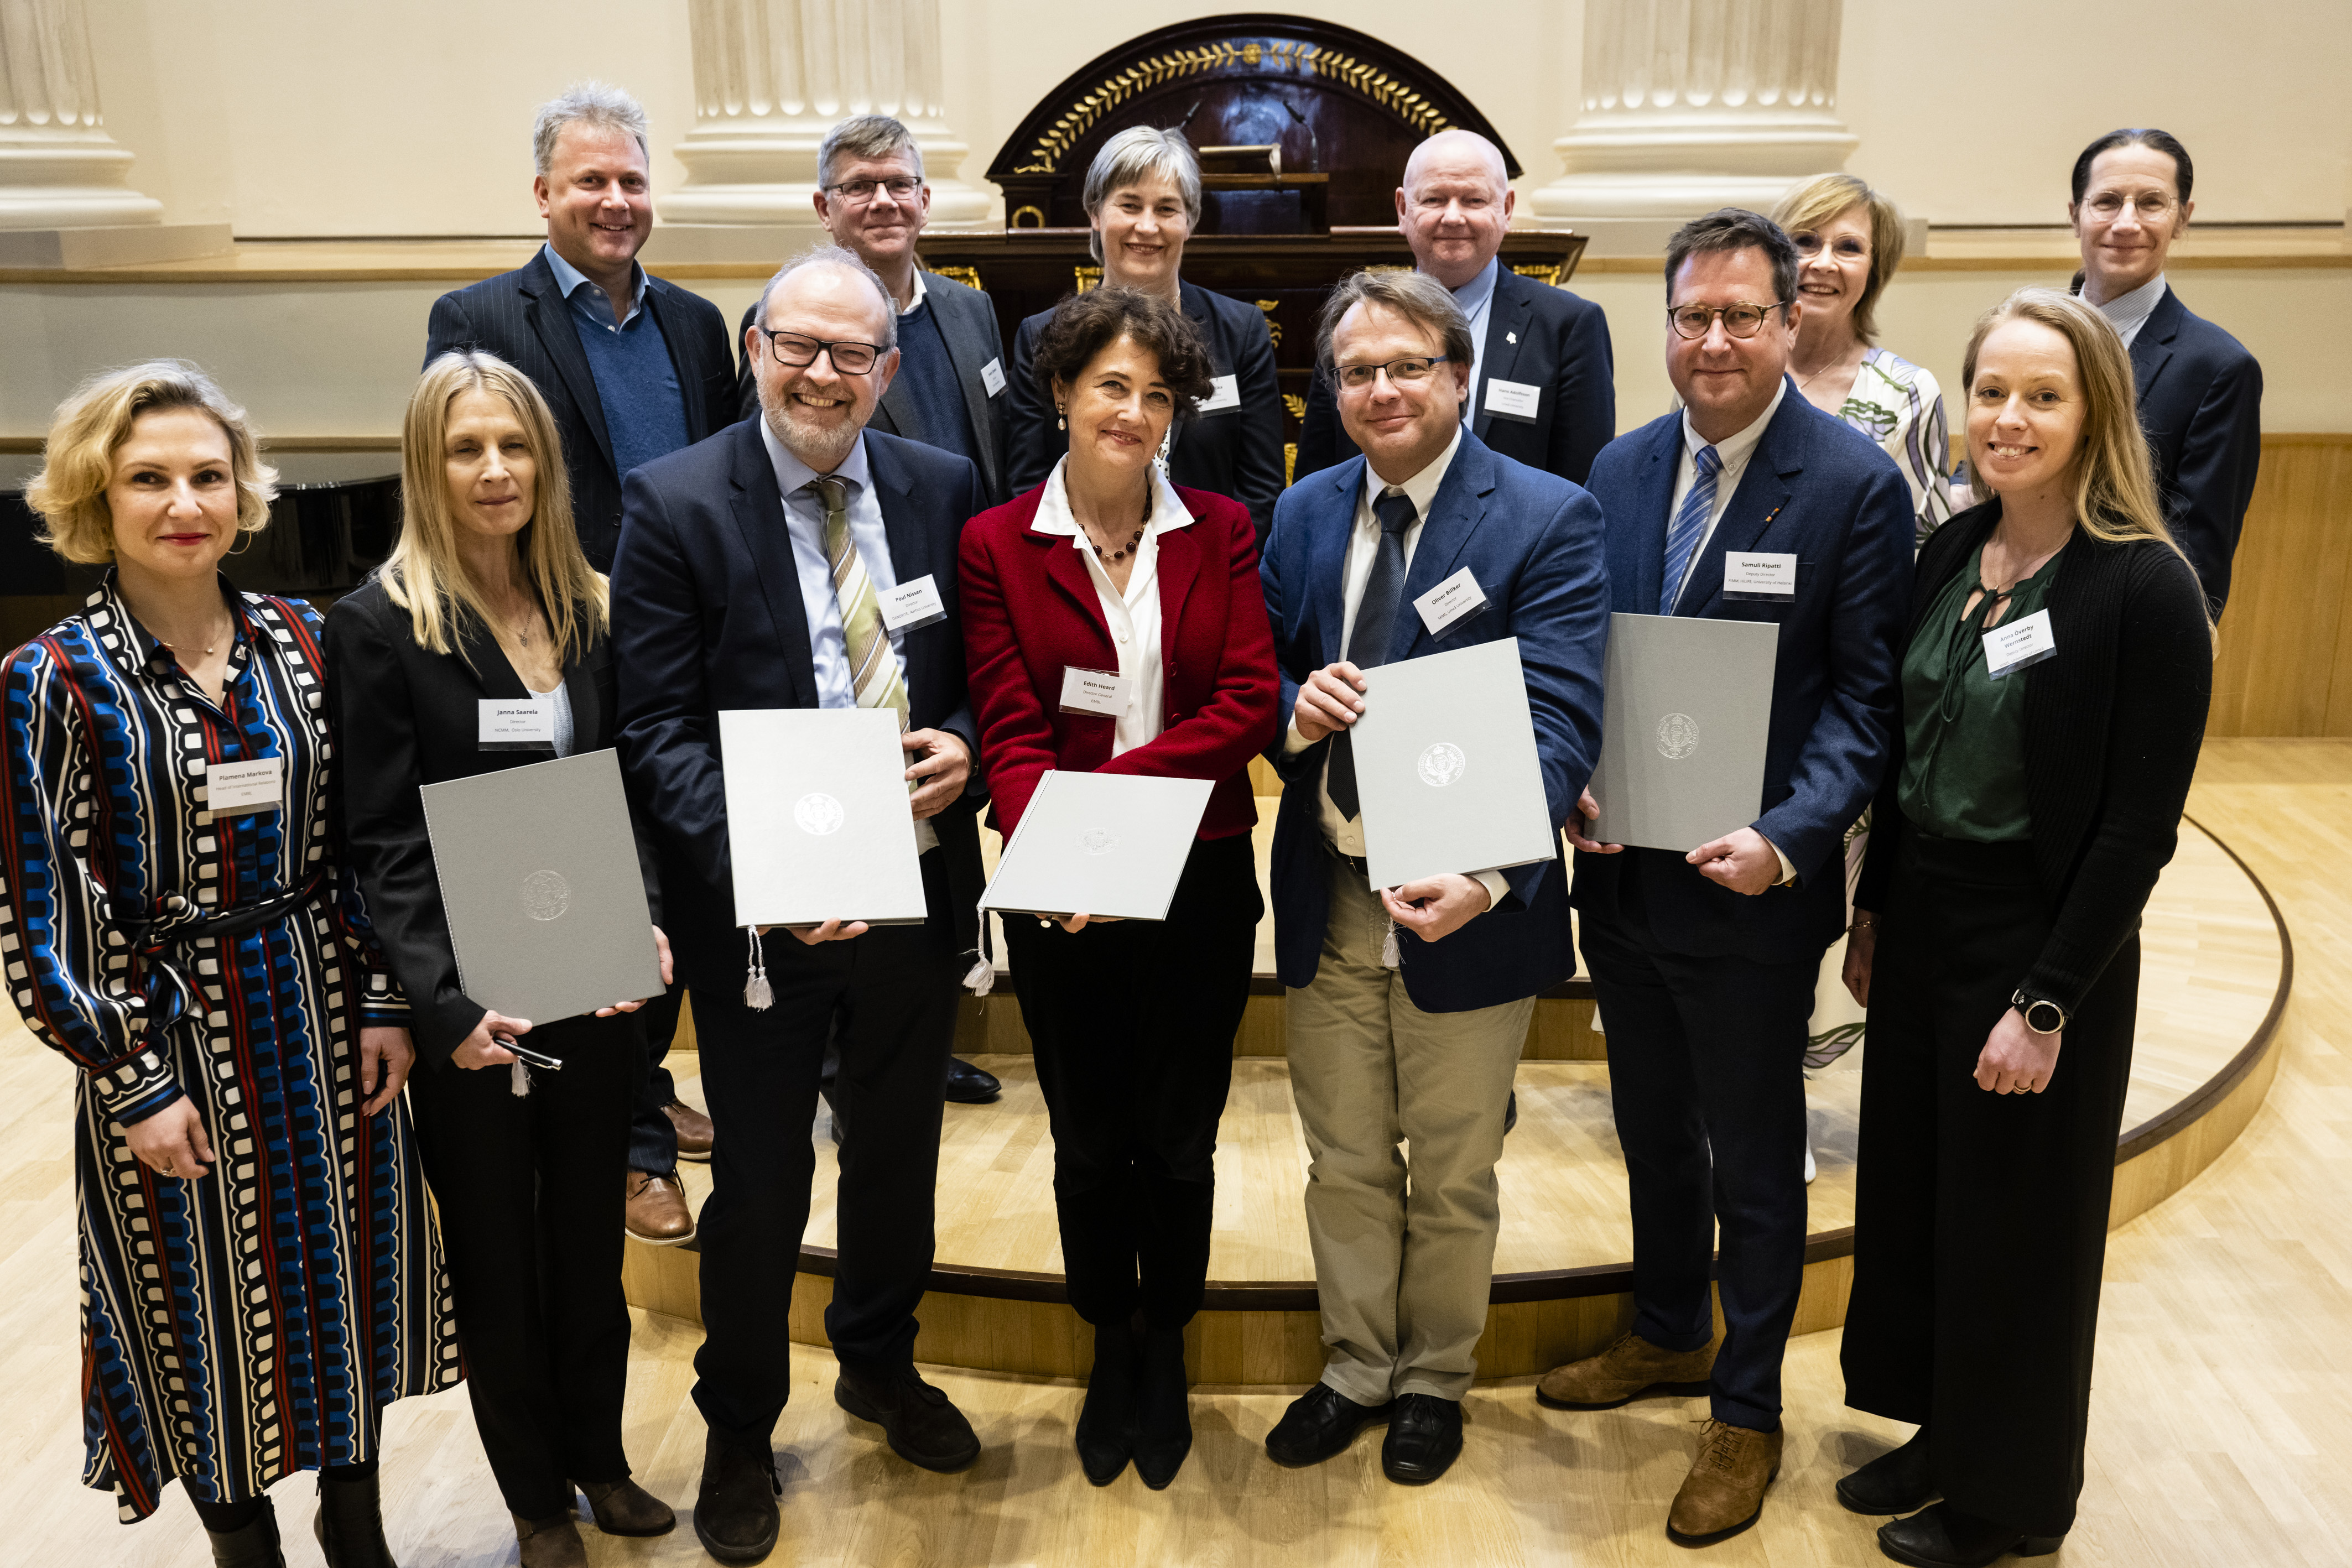 The signatories of the renewed agreement for Nordic EMBL Partnership for Molecular Medicine accompanied by other key stakeholders of the Nordic EMBL Partnership. Upper row, from left to right: Ewan Birney (Deputy Director General EMBL), Svein Stølen (Rector University of Oslo), Eika Berit (Prorector Aarhus University), Hans Adolfsson (Rector Umeå University), Sari Lindblom (Rector University of Helsinki), Mark Daly (Outgoing FIMM Director). Lower row, from left to right: Plamena Markova (Head of International Relations EMBL), Janna Saarela (NCMM Director), Poul Nissen (DANDRITE Director), Edith Heard (EMBL Director General), Oliver Billker (MIMS Director), Samuli Ripatti (FIMM Vice Director), Anna Överby Wernstedt (MIMS Deputy Director). Photo by Veikko Somerpuro.